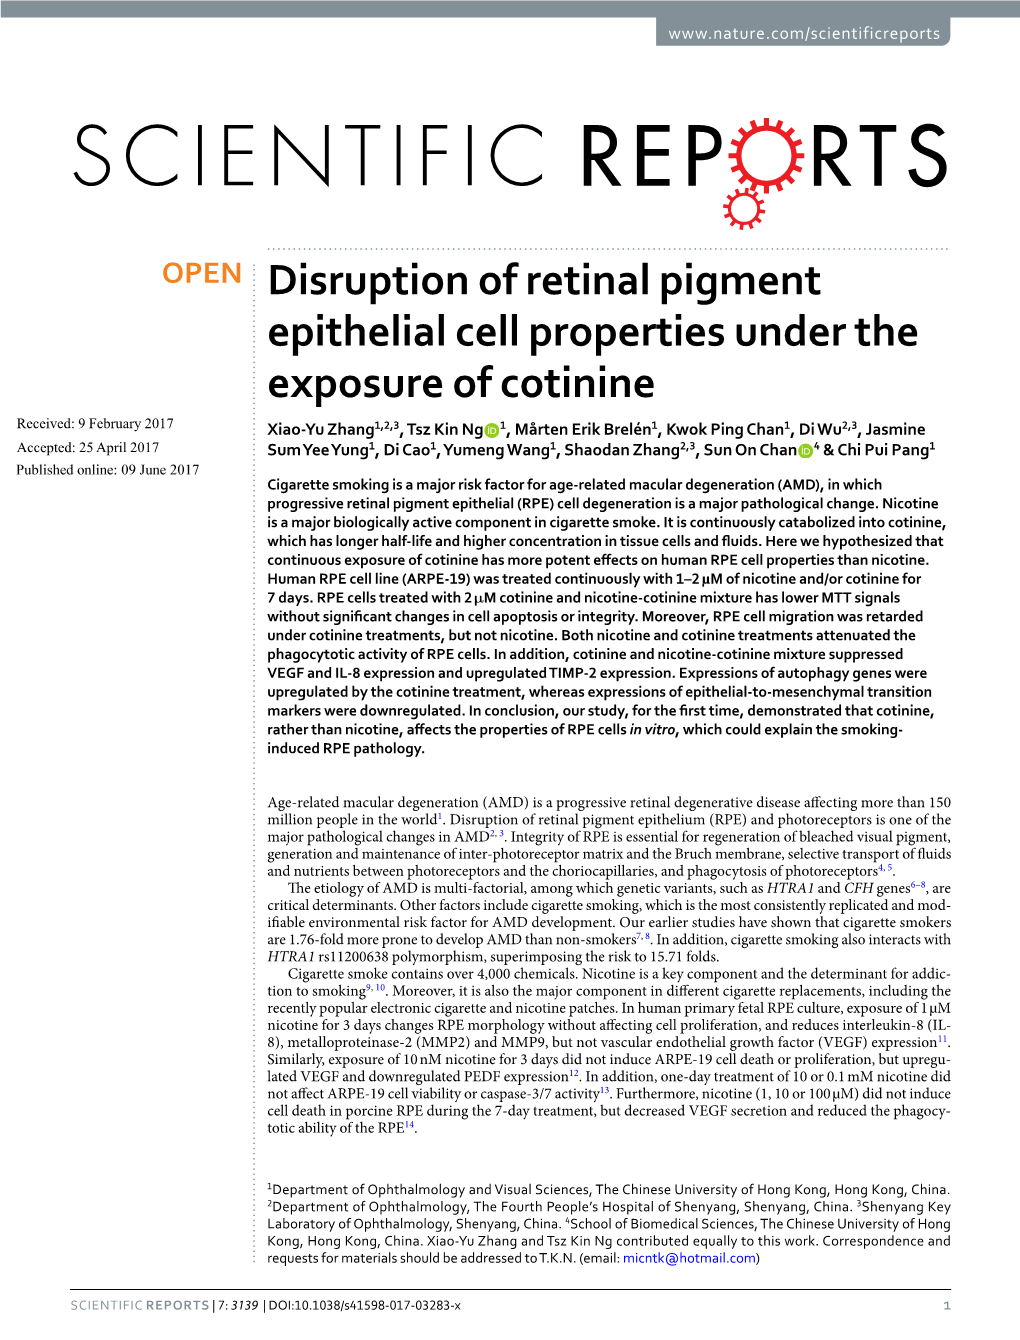 Disruption of Retinal Pigment Epithelial Cell Properties Under the Exposure